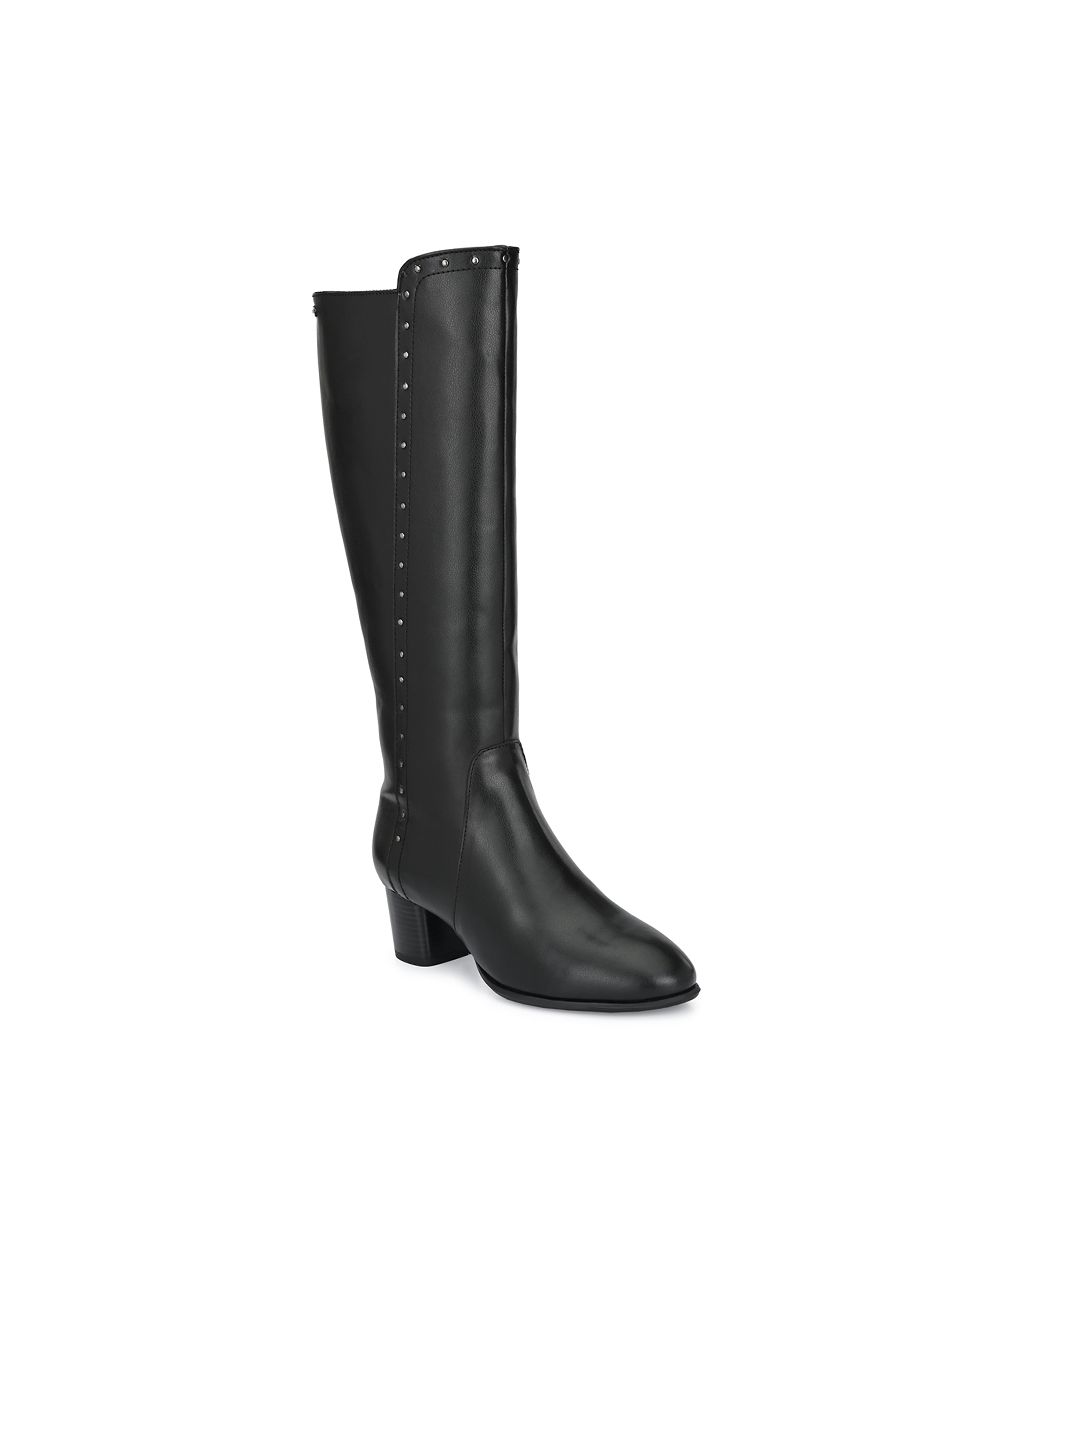 Delize Women Black High-Top Block Heeled Boots Price in India